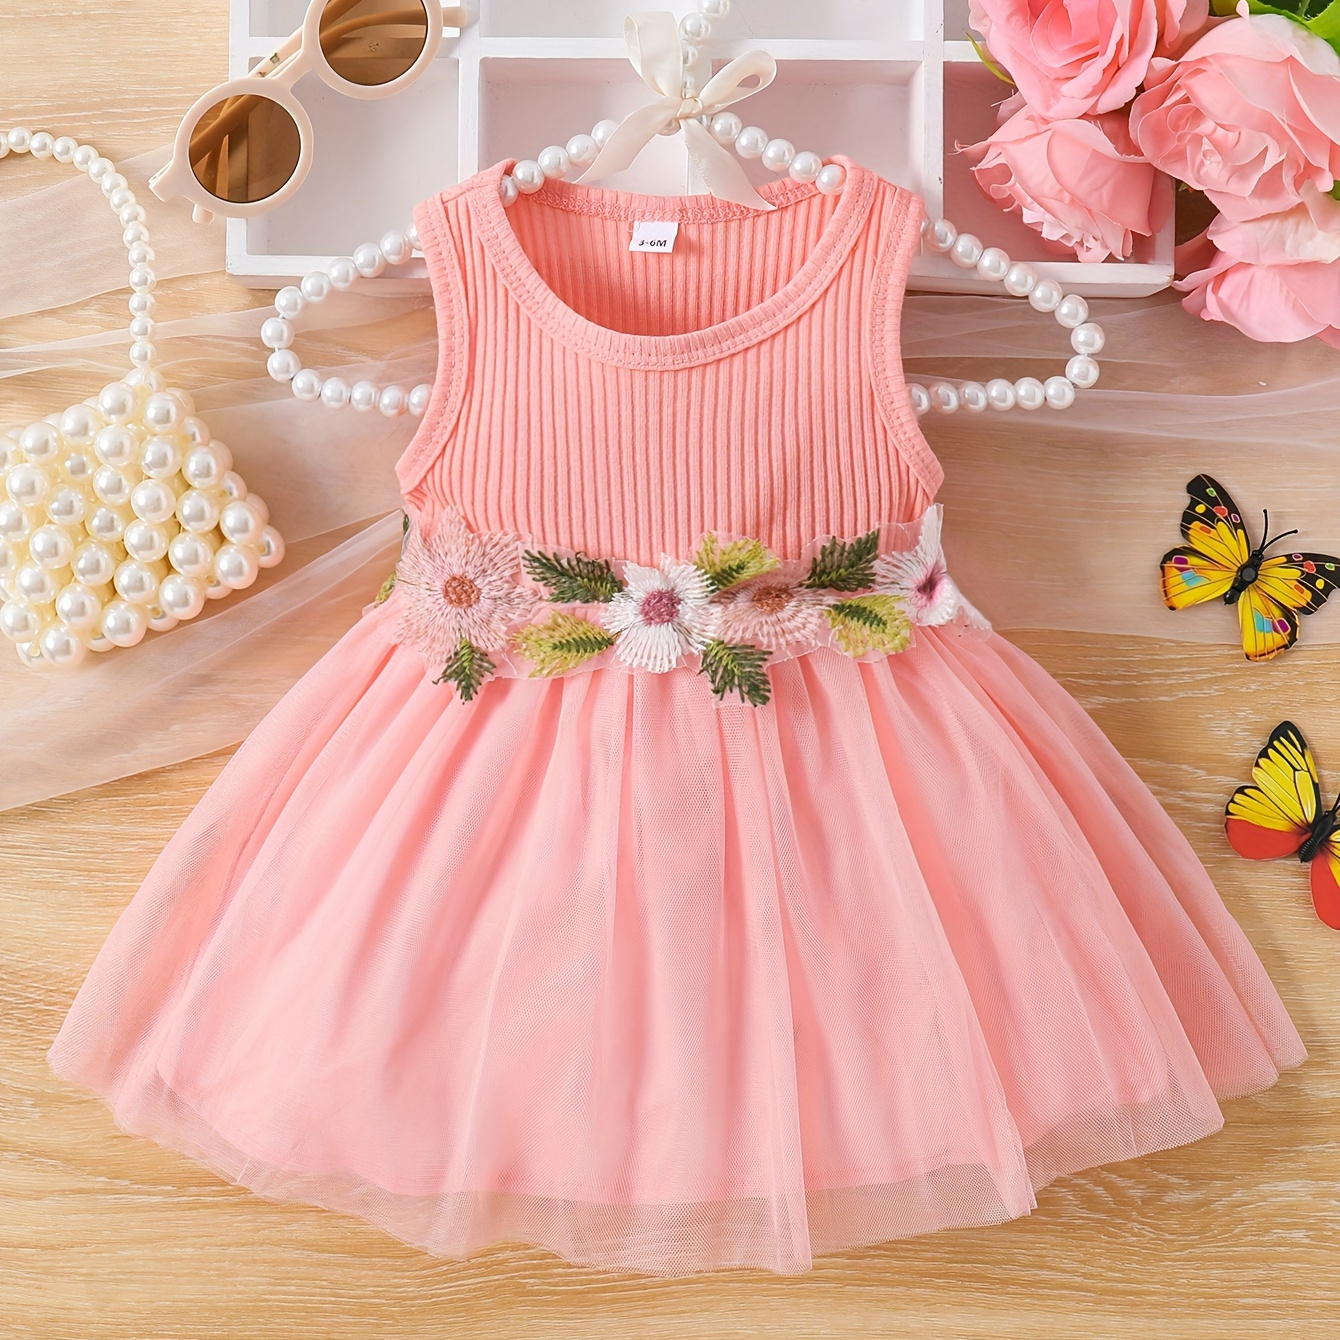 

Baby's Flower Embroidered Mesh Splicing Dress, Ribbed Sleeveless Dress, Infant & Toddler Girl's Clothing For Summer/spring, As Gift